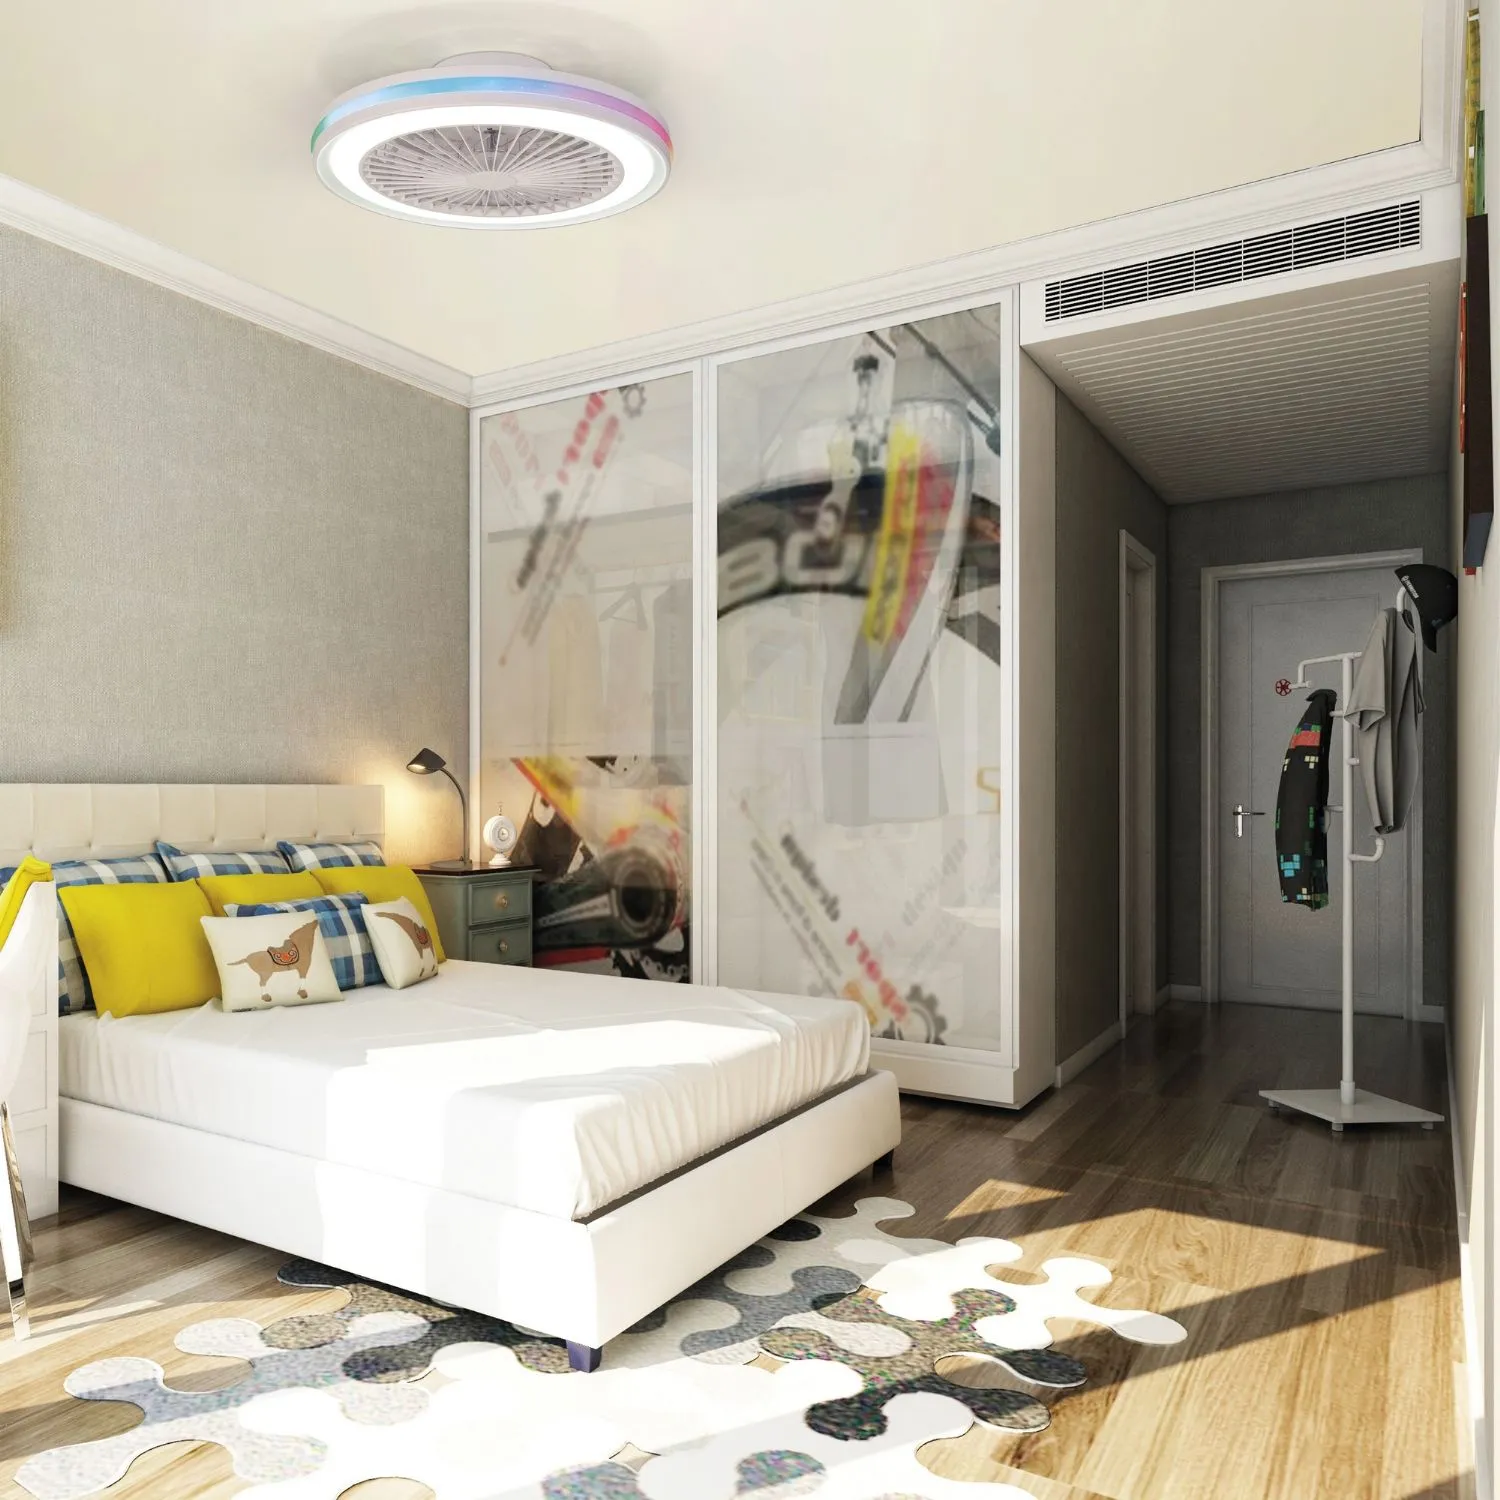 White Dimmable RGB Ceiling Light With Built In 20W DC Fan